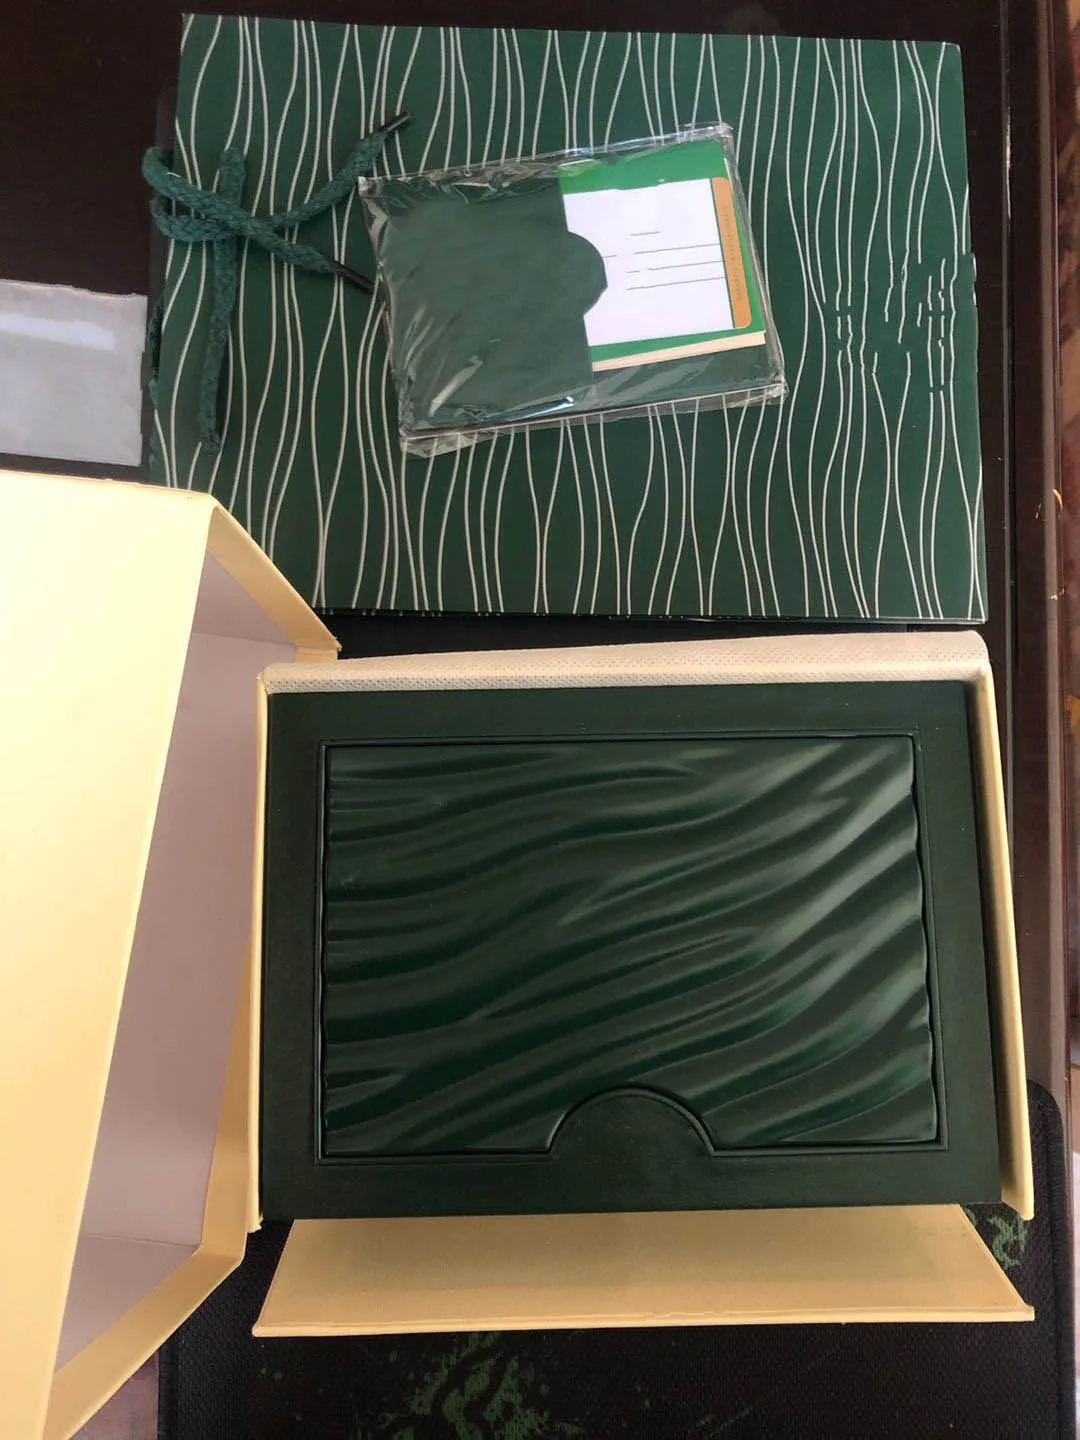 Luxury Watch Gift Box Wood Paper Material Green Small Manual Card Card Card Sapphire Водонепроницаемый вариант оплаты Лучшее качество